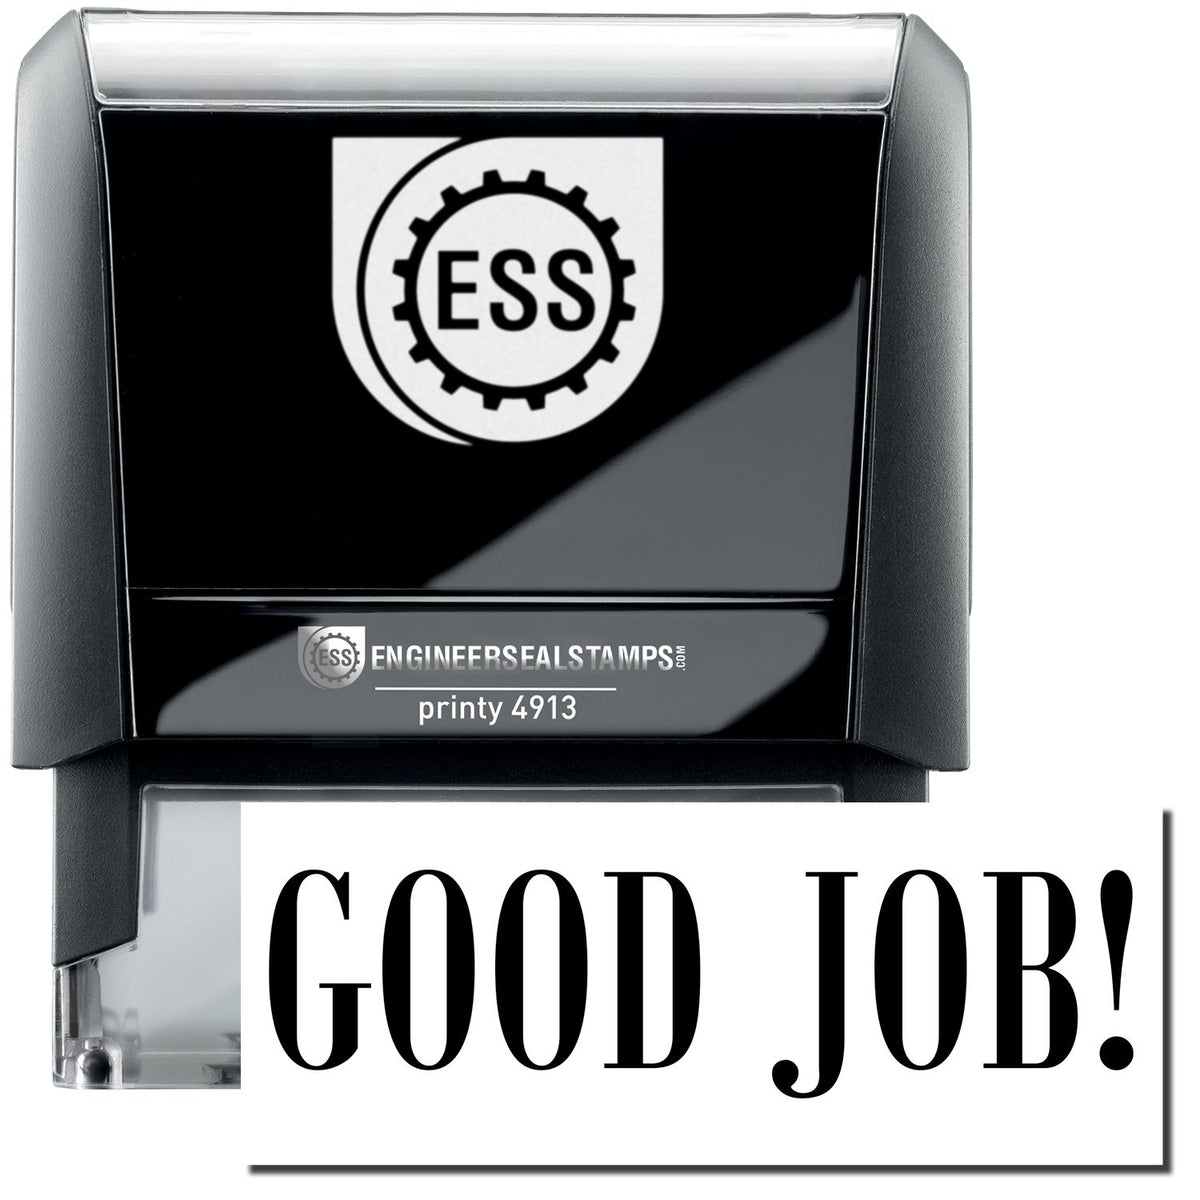 A self-inking stamp with a stamped image showing how the text &quot;GOOD JOB!&quot; in a large bold font is displayed by it.